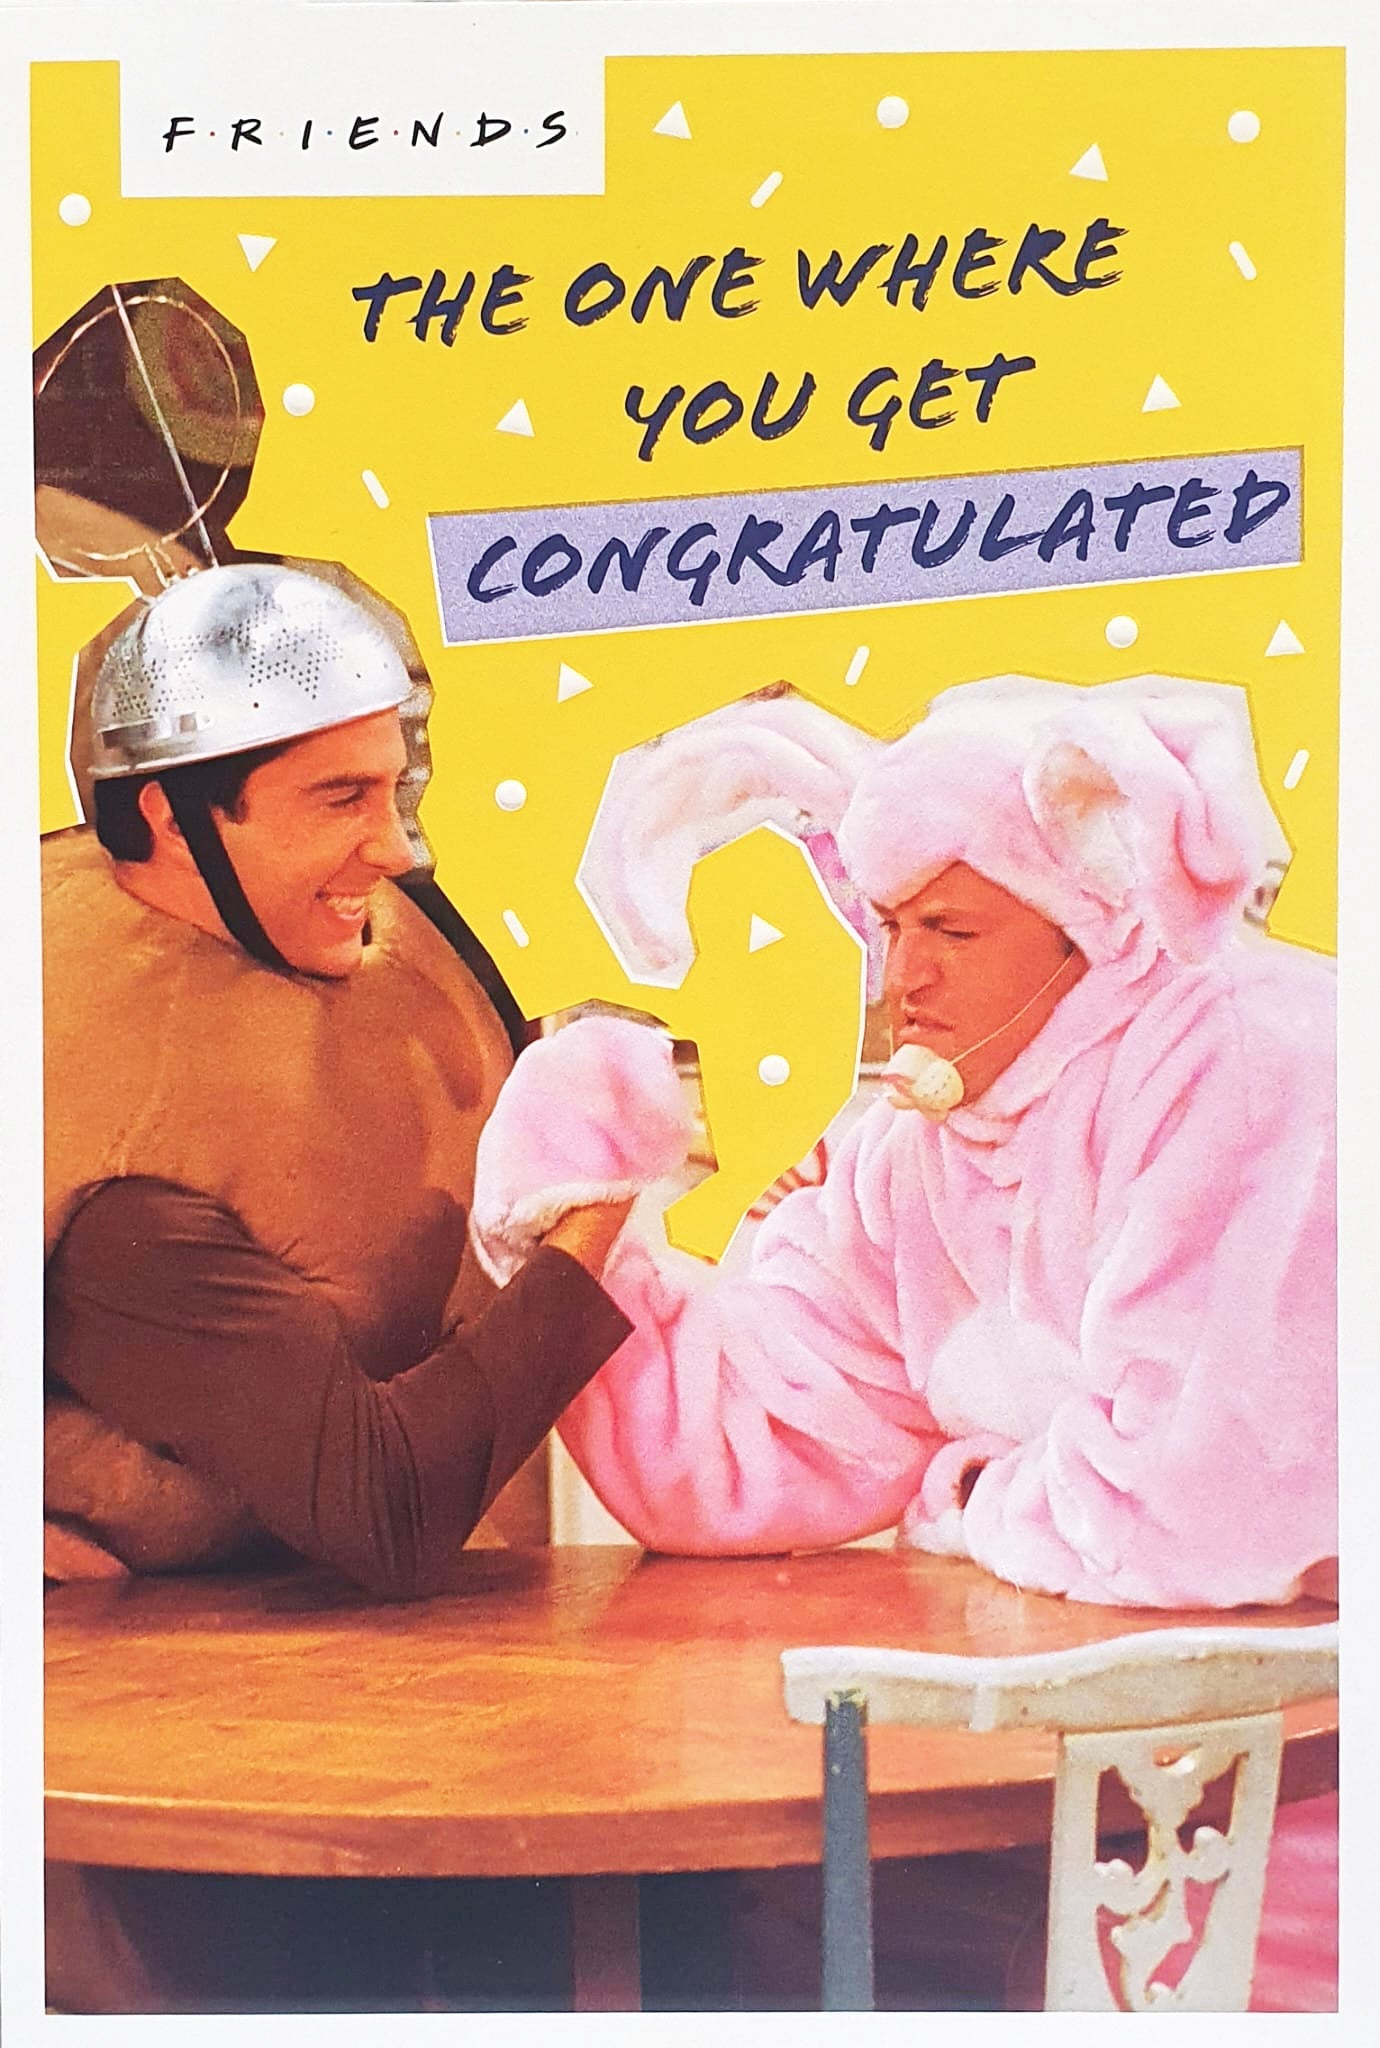 Humorous Congratulations Card - From The Television Series "Friends"